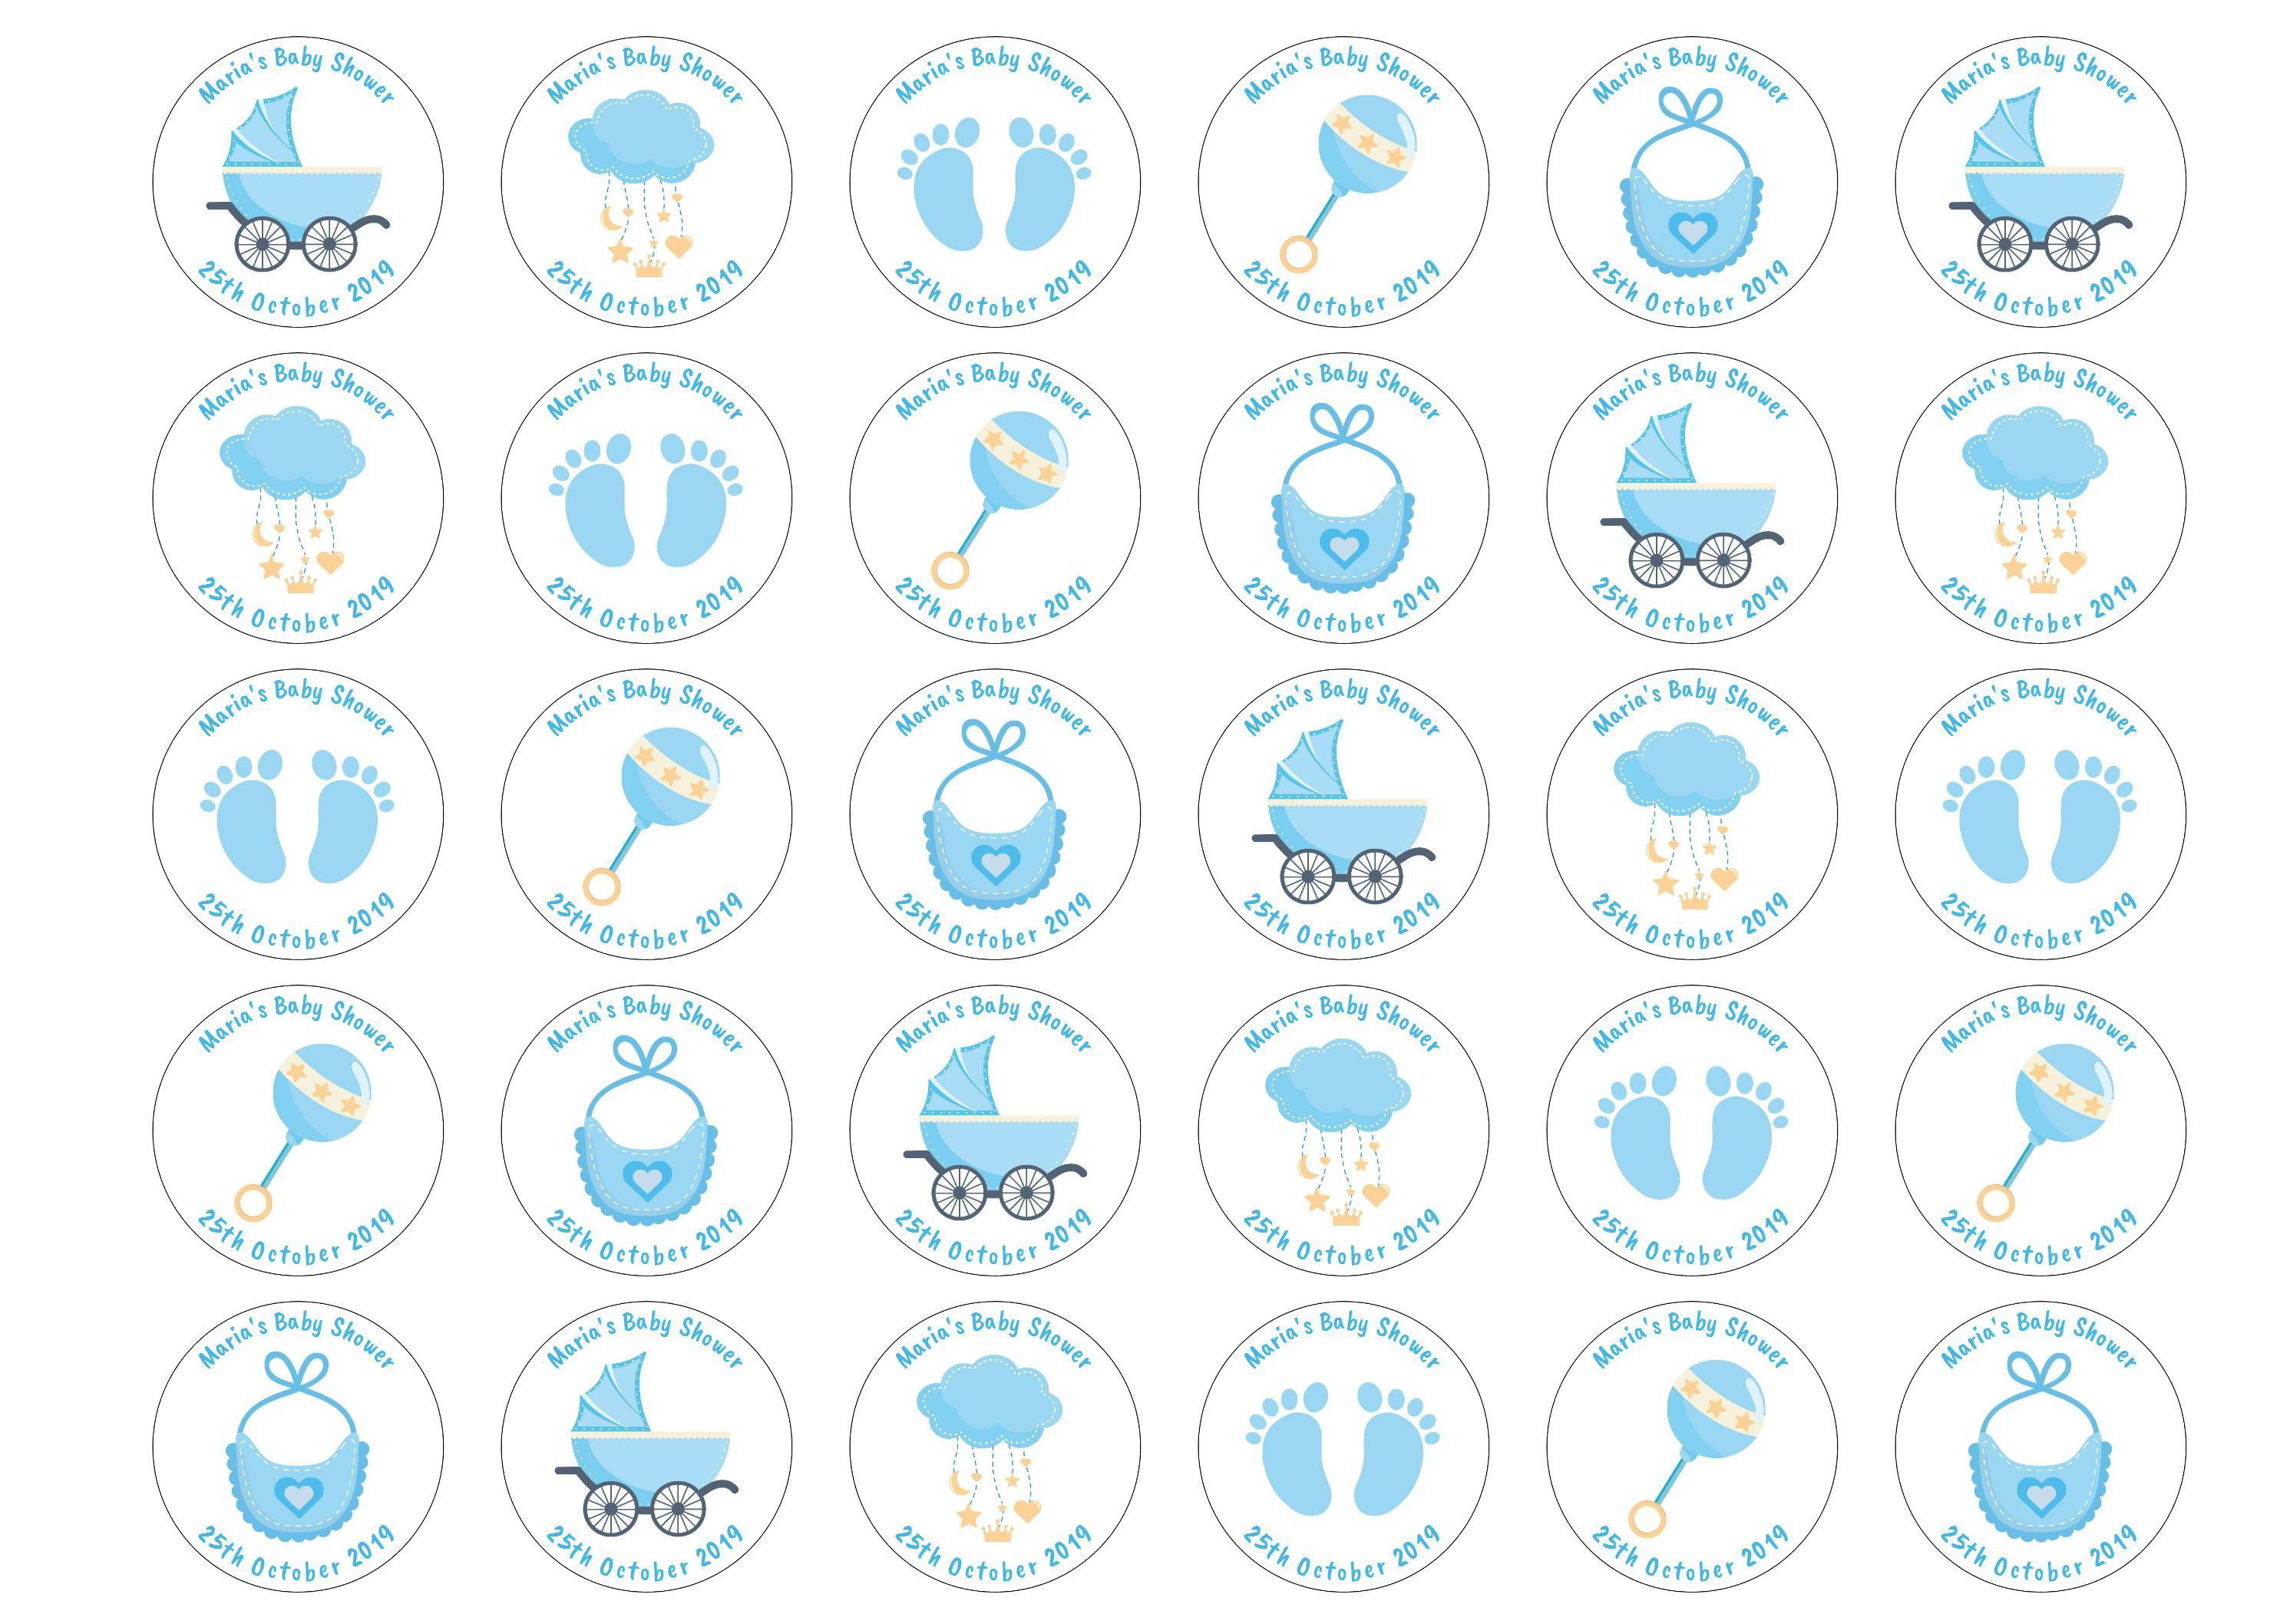 30 edible baby shower toppers with baby blue images